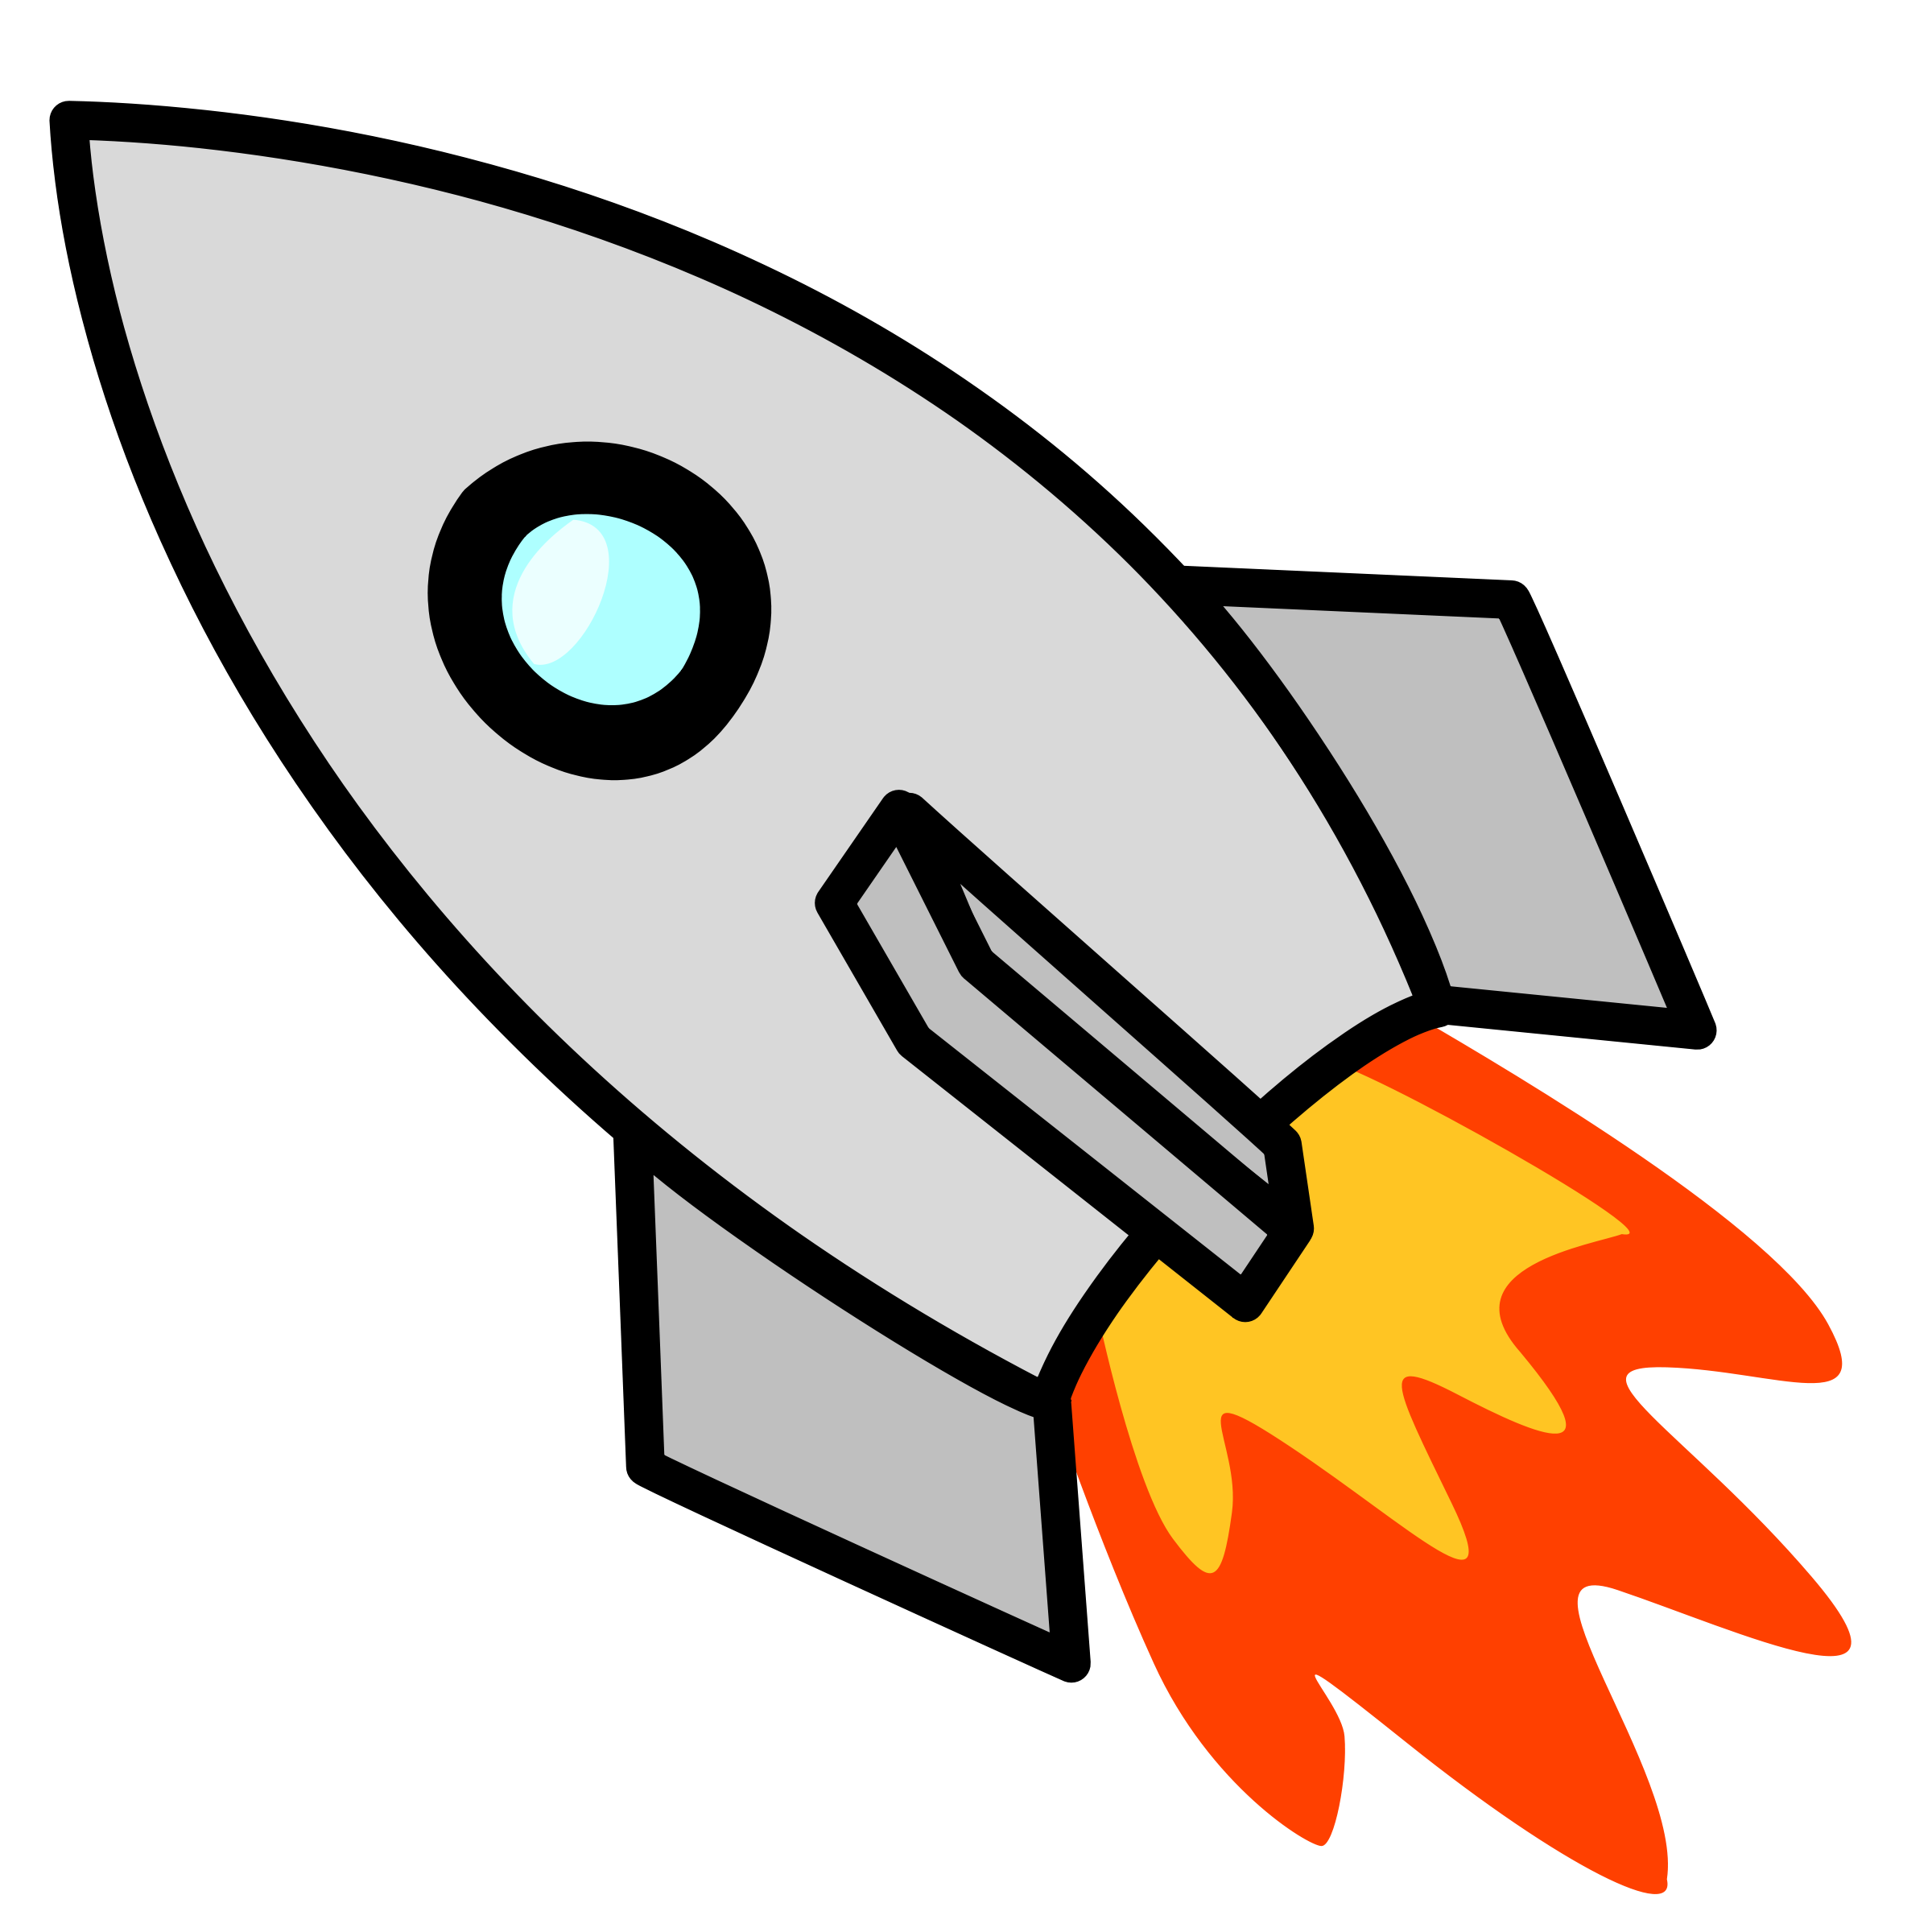 Clipart Of Rocket Ship Shapes   Clipart Best